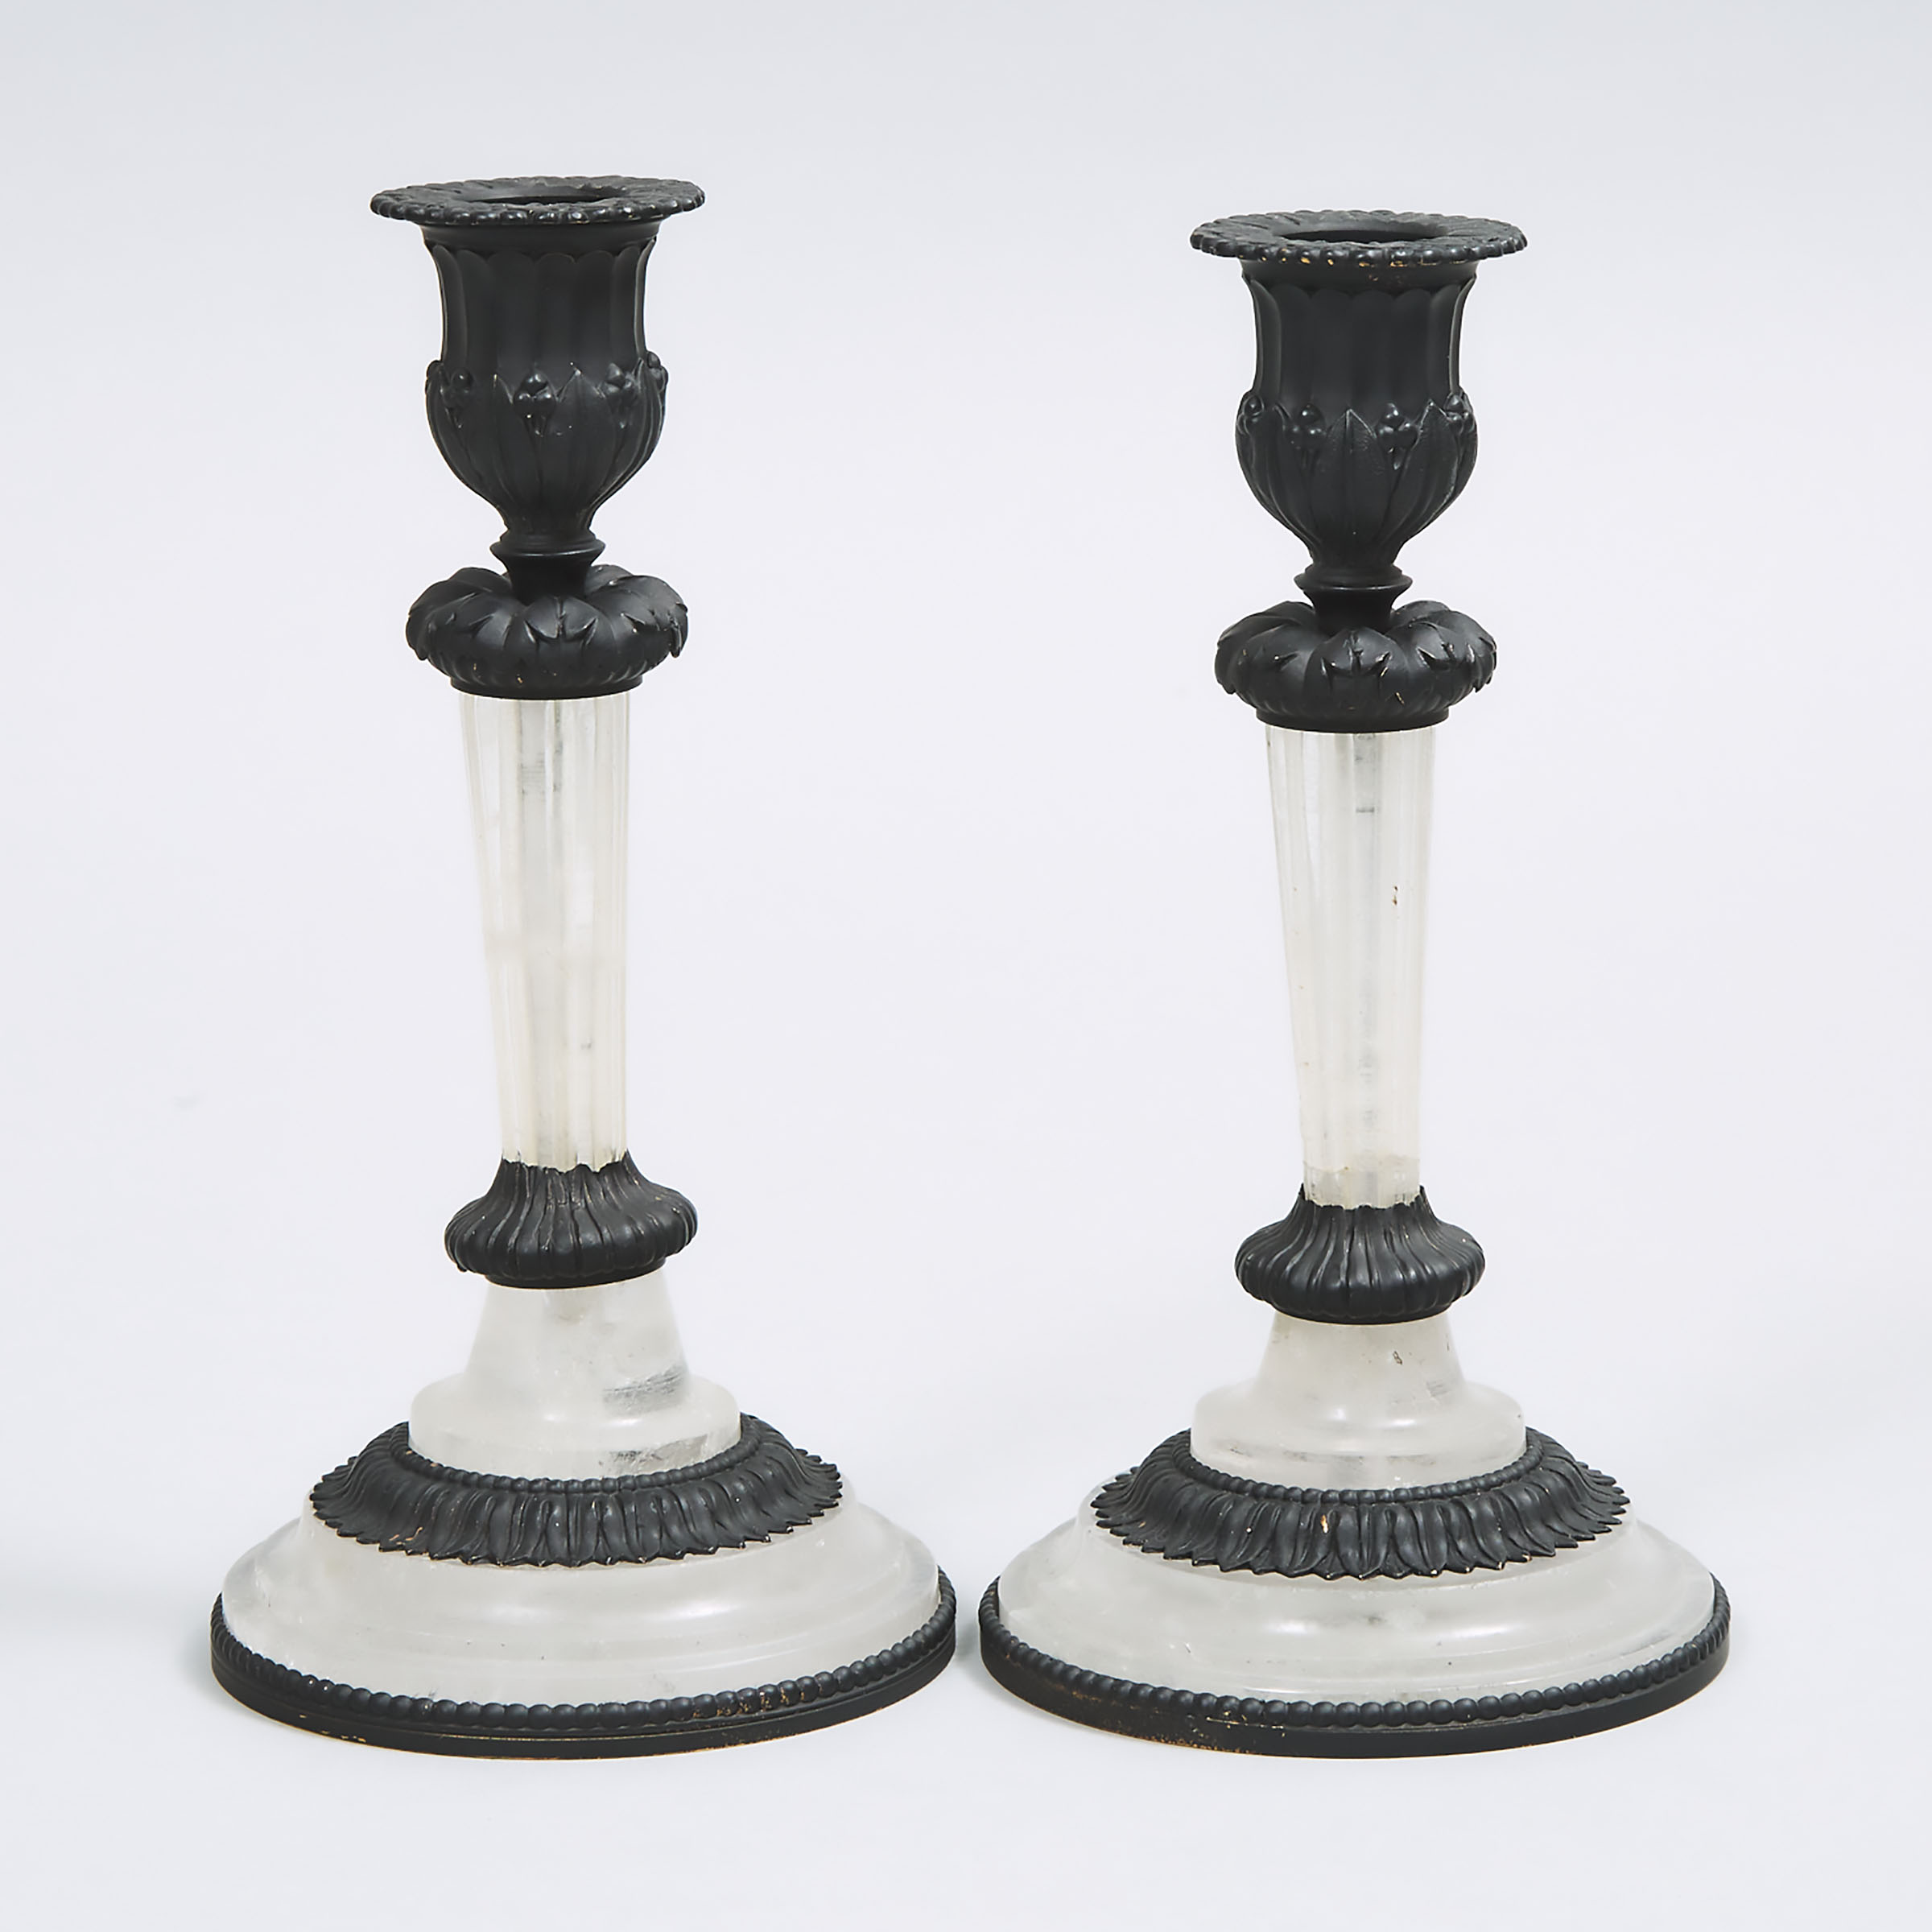 Pair of French Rock Crystal and Bronze Candlesticks, 20th century